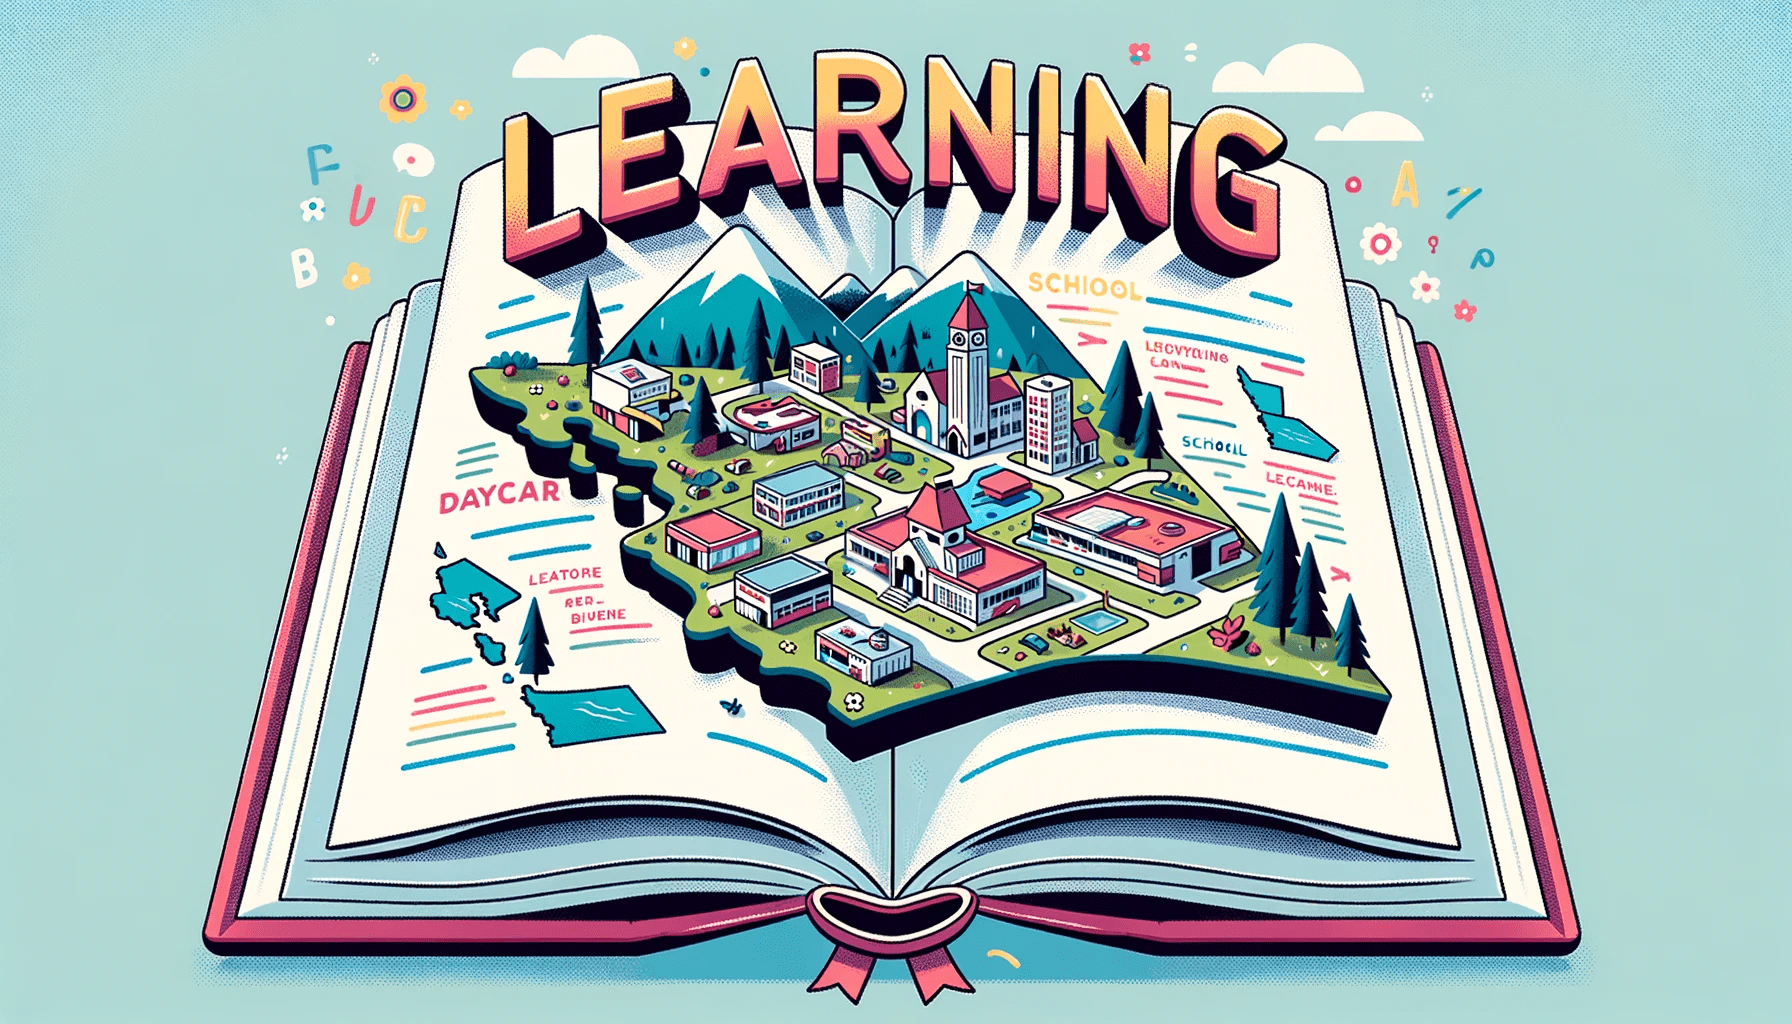 Illustration of an open book with pages transforming into a map of British Columbia. On the map, school and daycare buildings are depicted, along with snippets of articles about them. The title 'Learning in BC' floats above in vibrant letters.